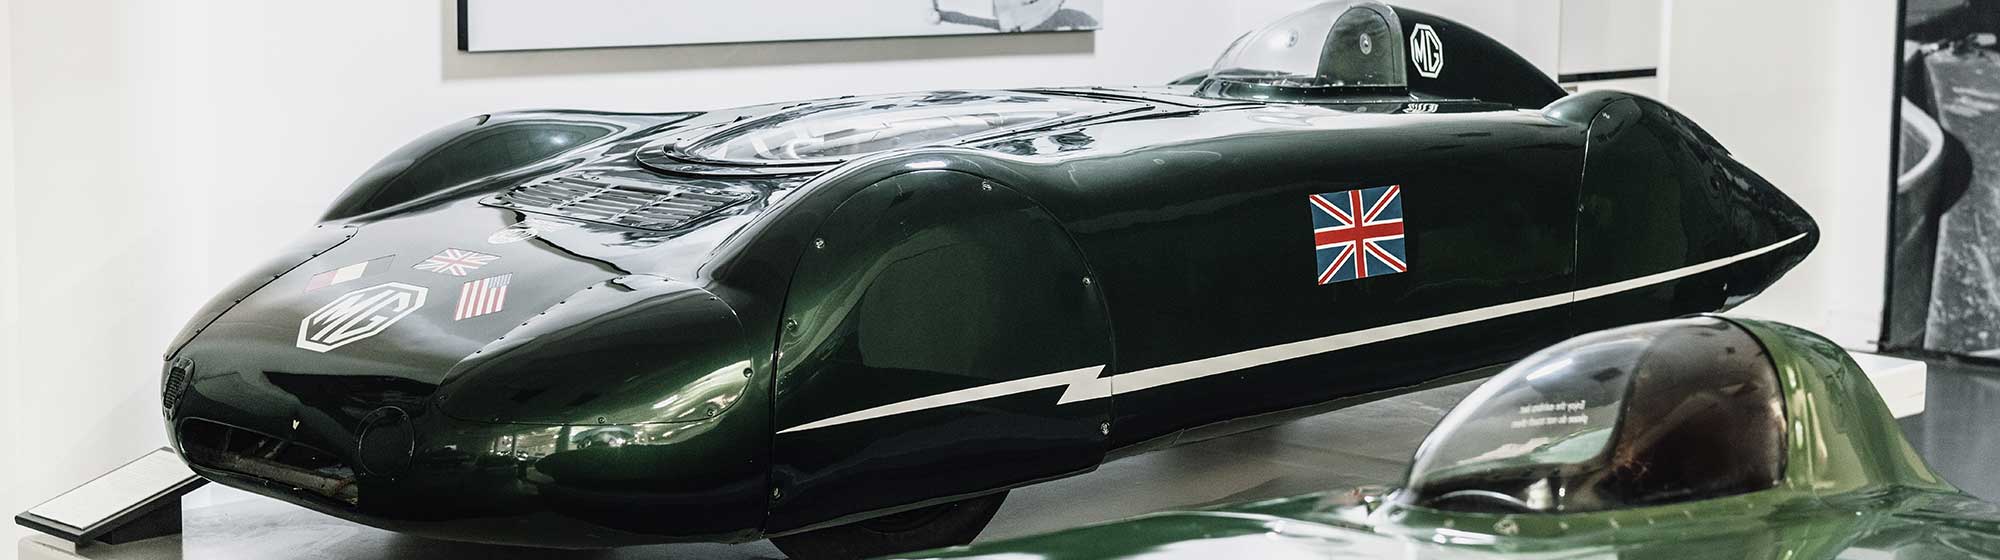 Photo of a green MG EX 181 from the British Motor Museum, which will be on display at Rétromobile 2024 to mark the 100th anniversary of the MG marque.